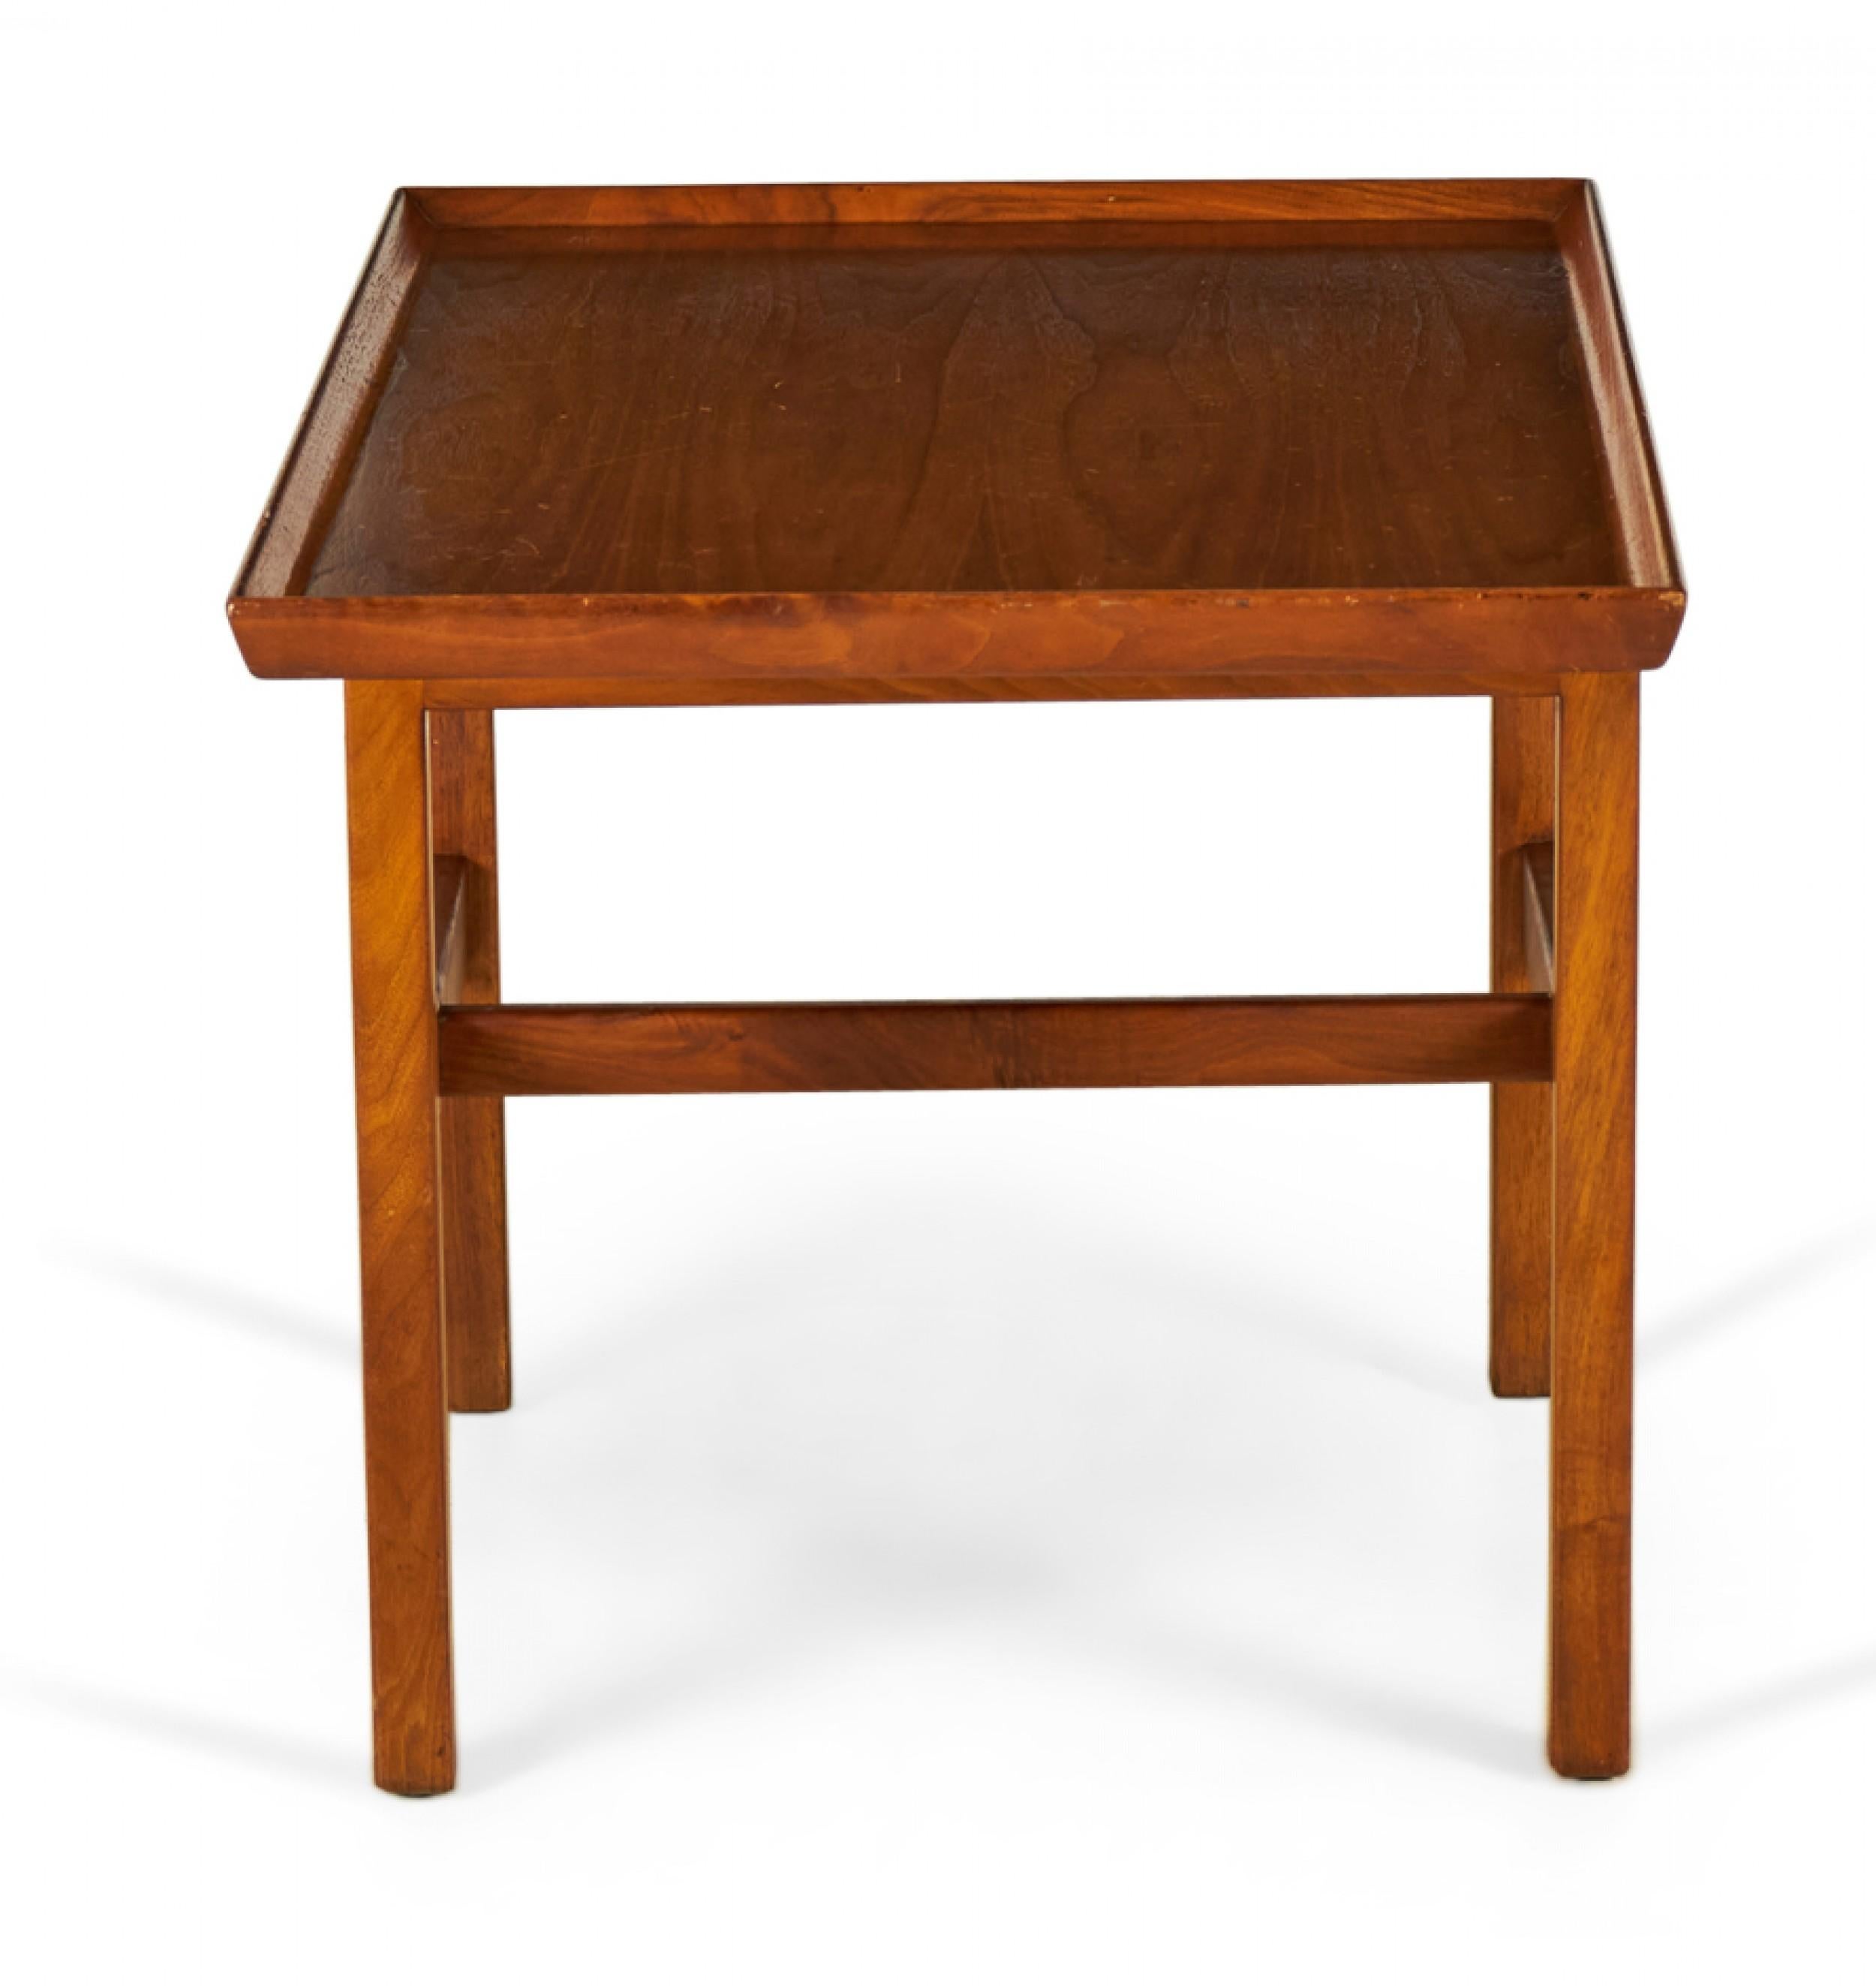 Danish mid-century walnut cantilever side / end table with a rectangular off-center tabletop with shallow gallery supported by a walnut stretcher base. (Jens Risom).
    